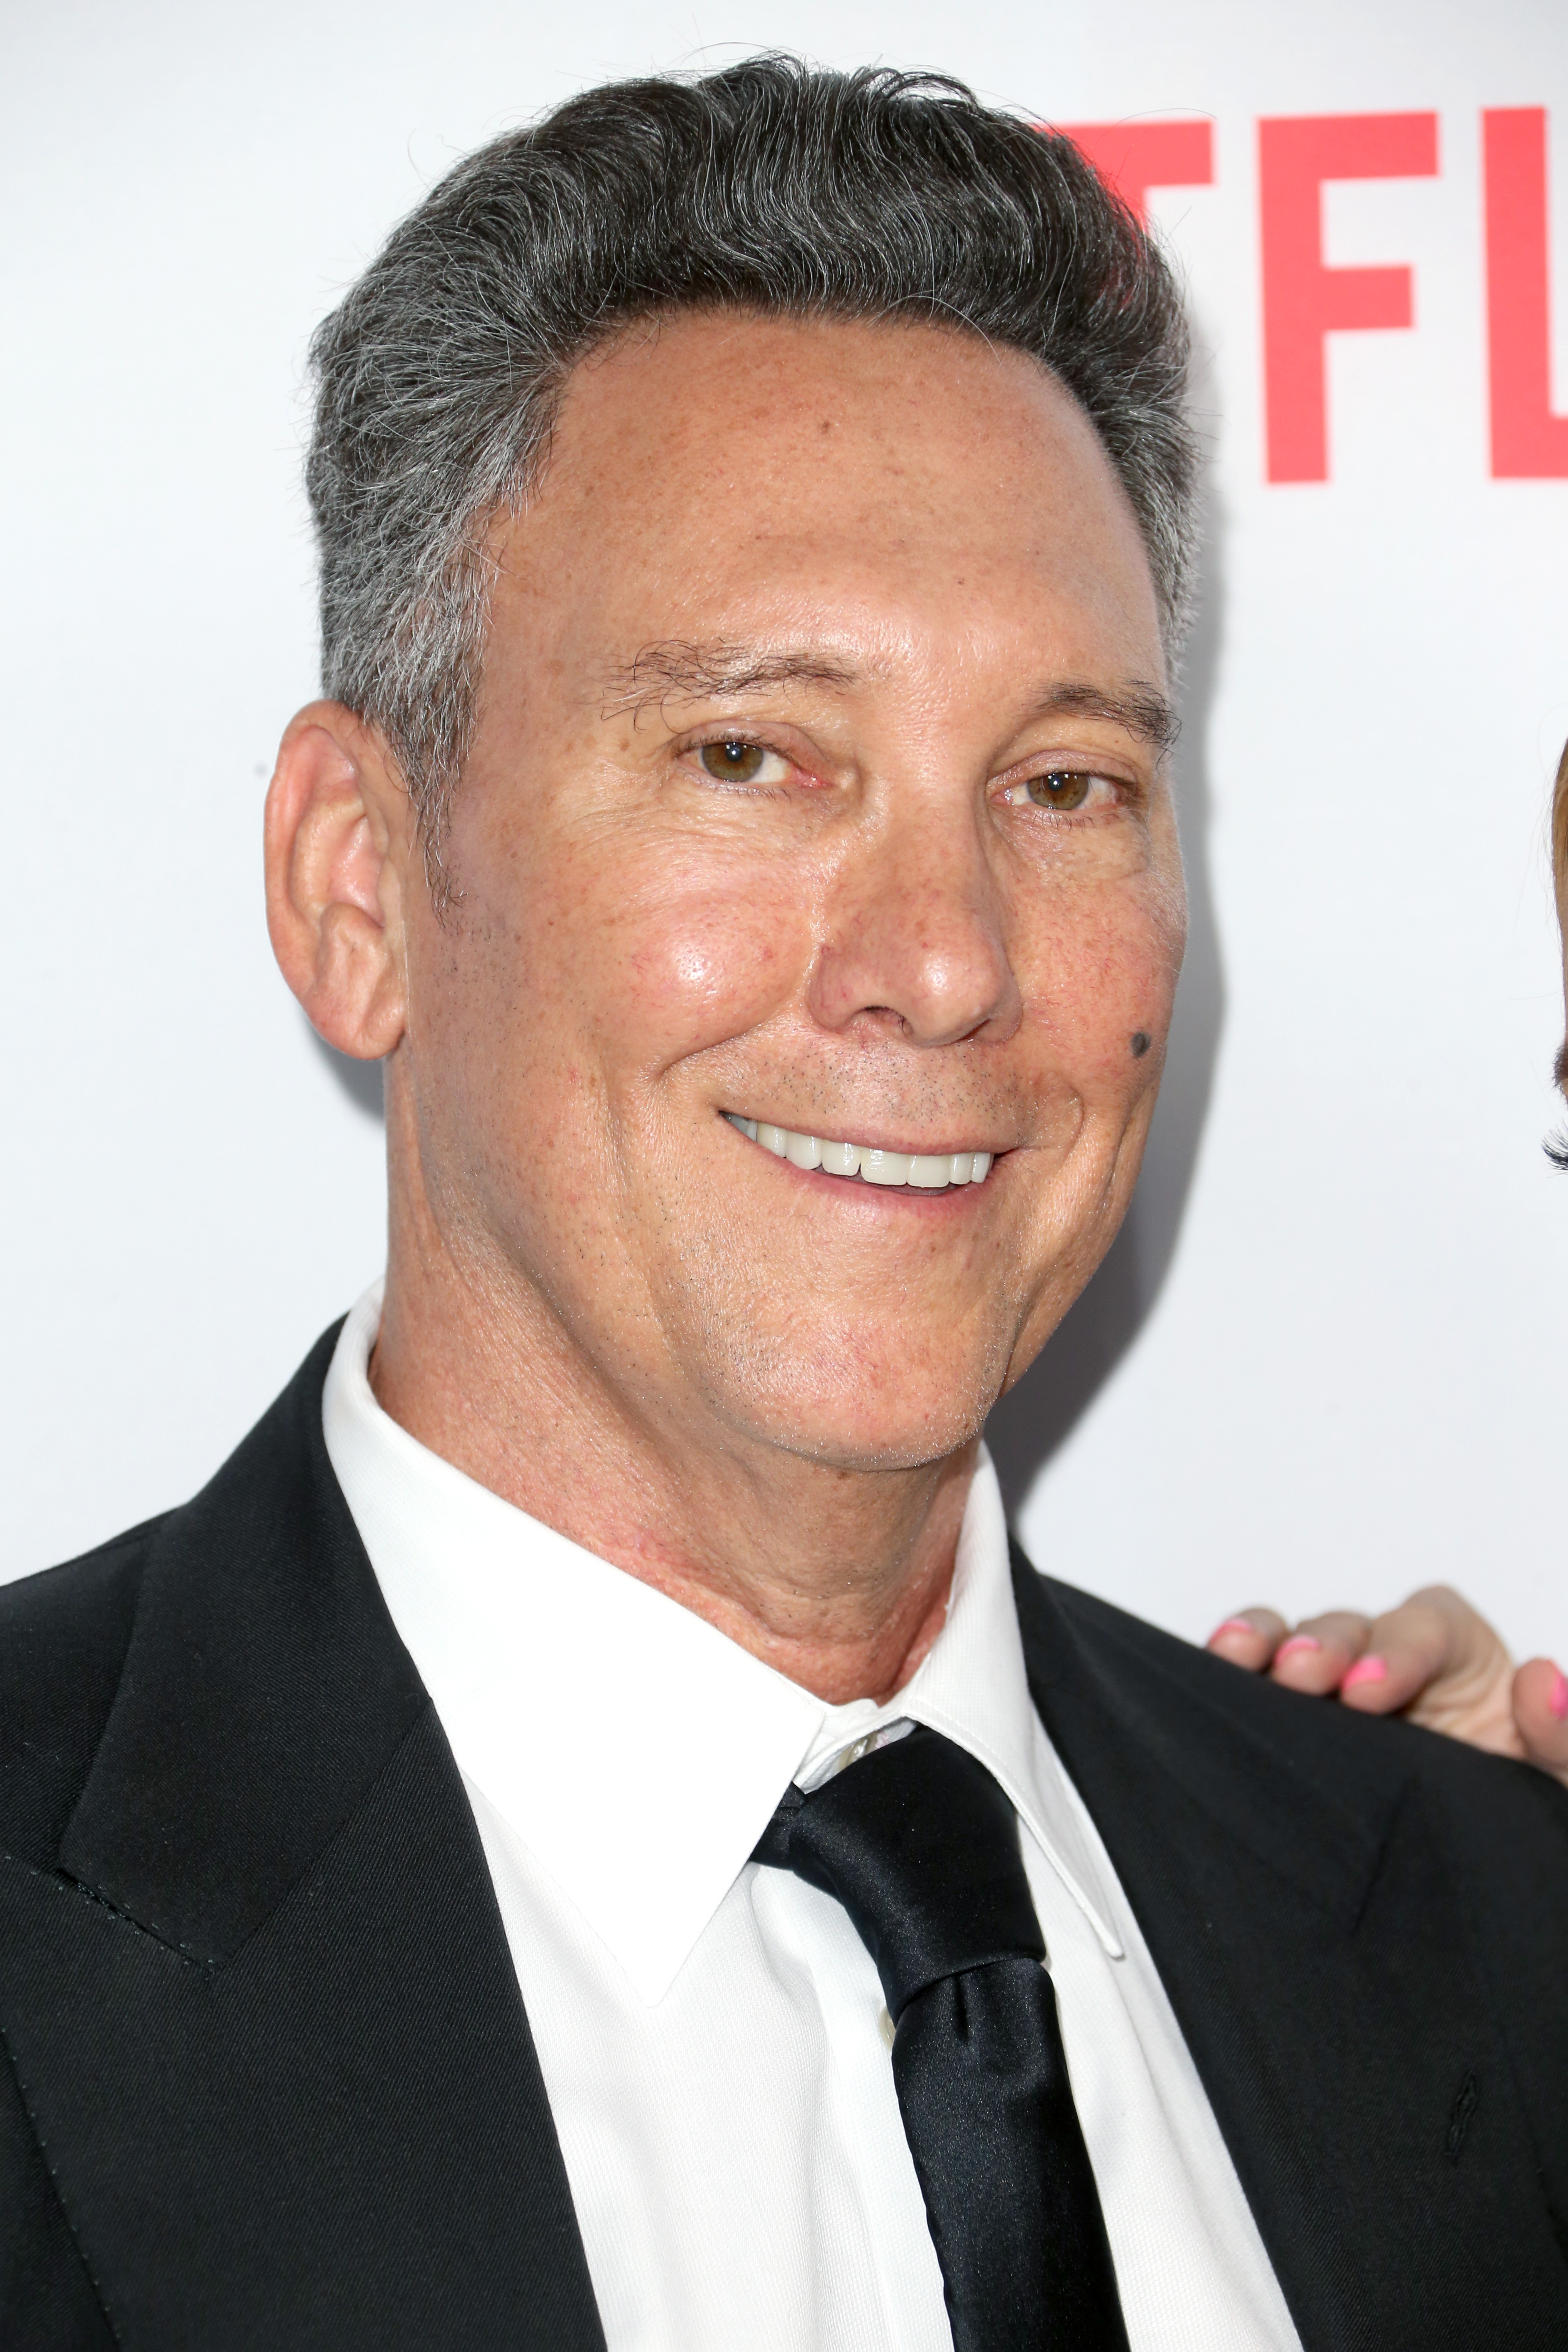 Writer/producer Jeff Franklin attends the premiere of Netflix's "Fuller House" at Pacific Theatres at The Grove on February 16, 2016 in Los Angeles, California. (Photo by Frederick M. Brown/Getty Images)